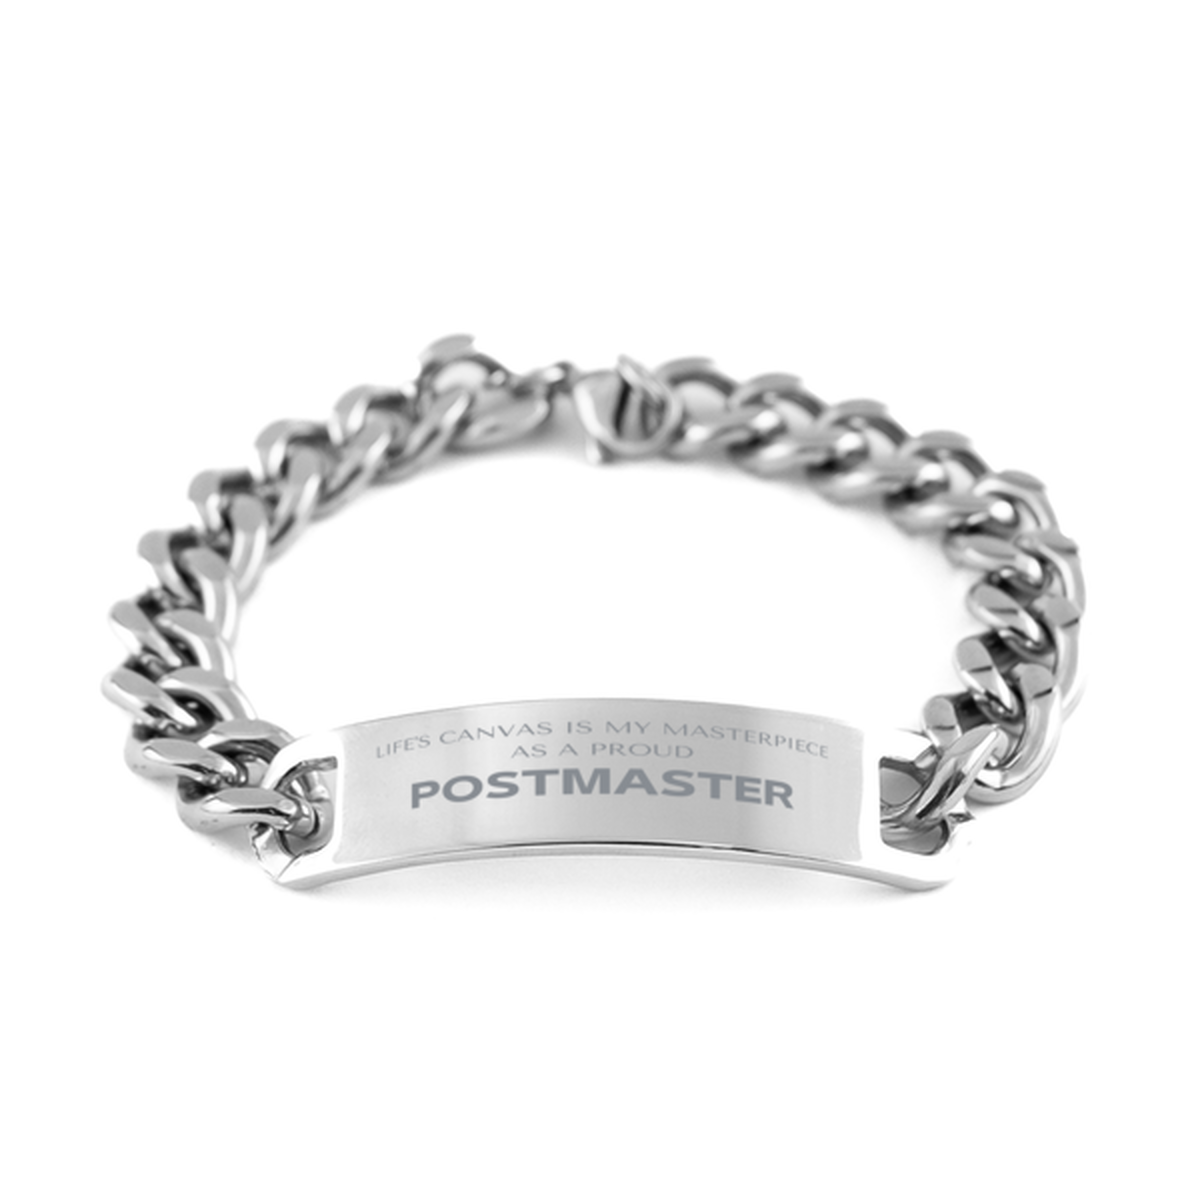 Proud Postmaster Gifts, Life's canvas is my masterpiece, Epic Birthday Christmas Unique Cuban Chain Stainless Steel Bracelet For Postmaster, Coworkers, Men, Women, Friends